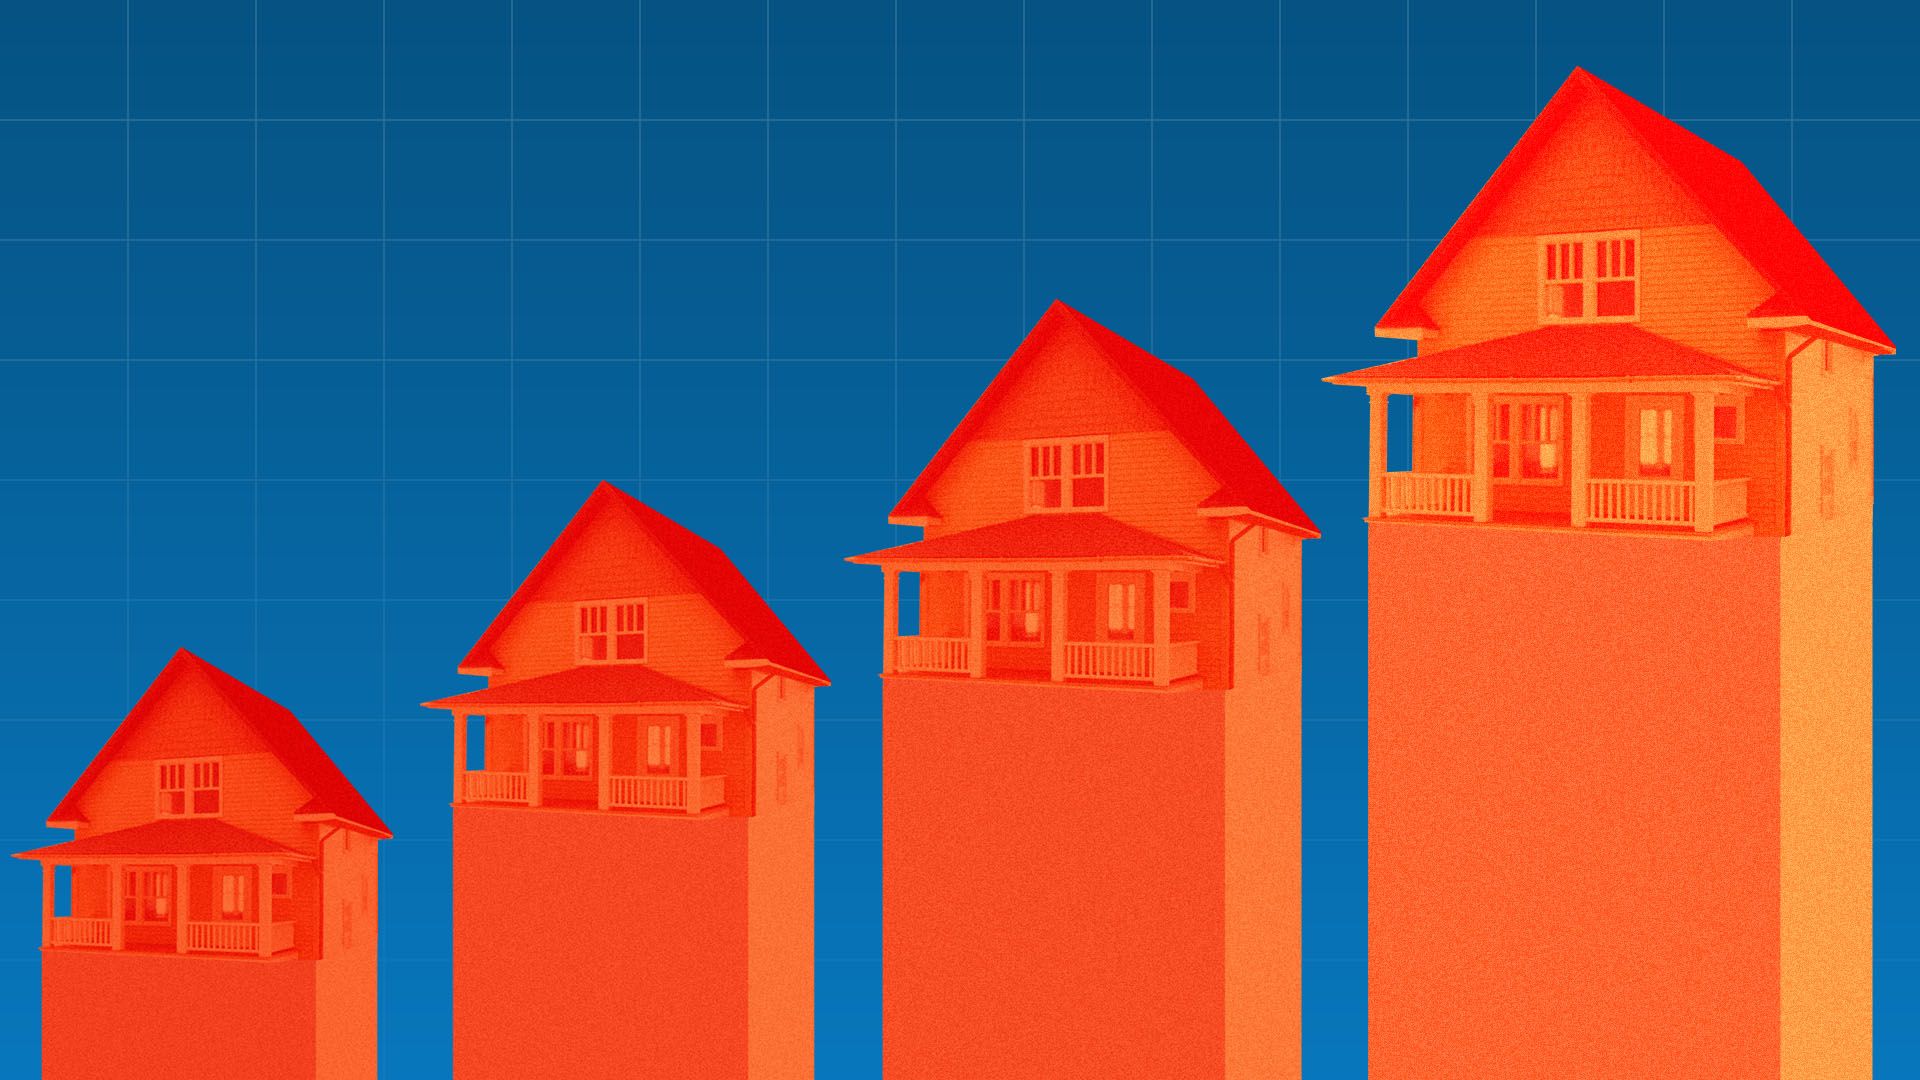 This illustration shows a rising bar graph with a house at the top of each bar 